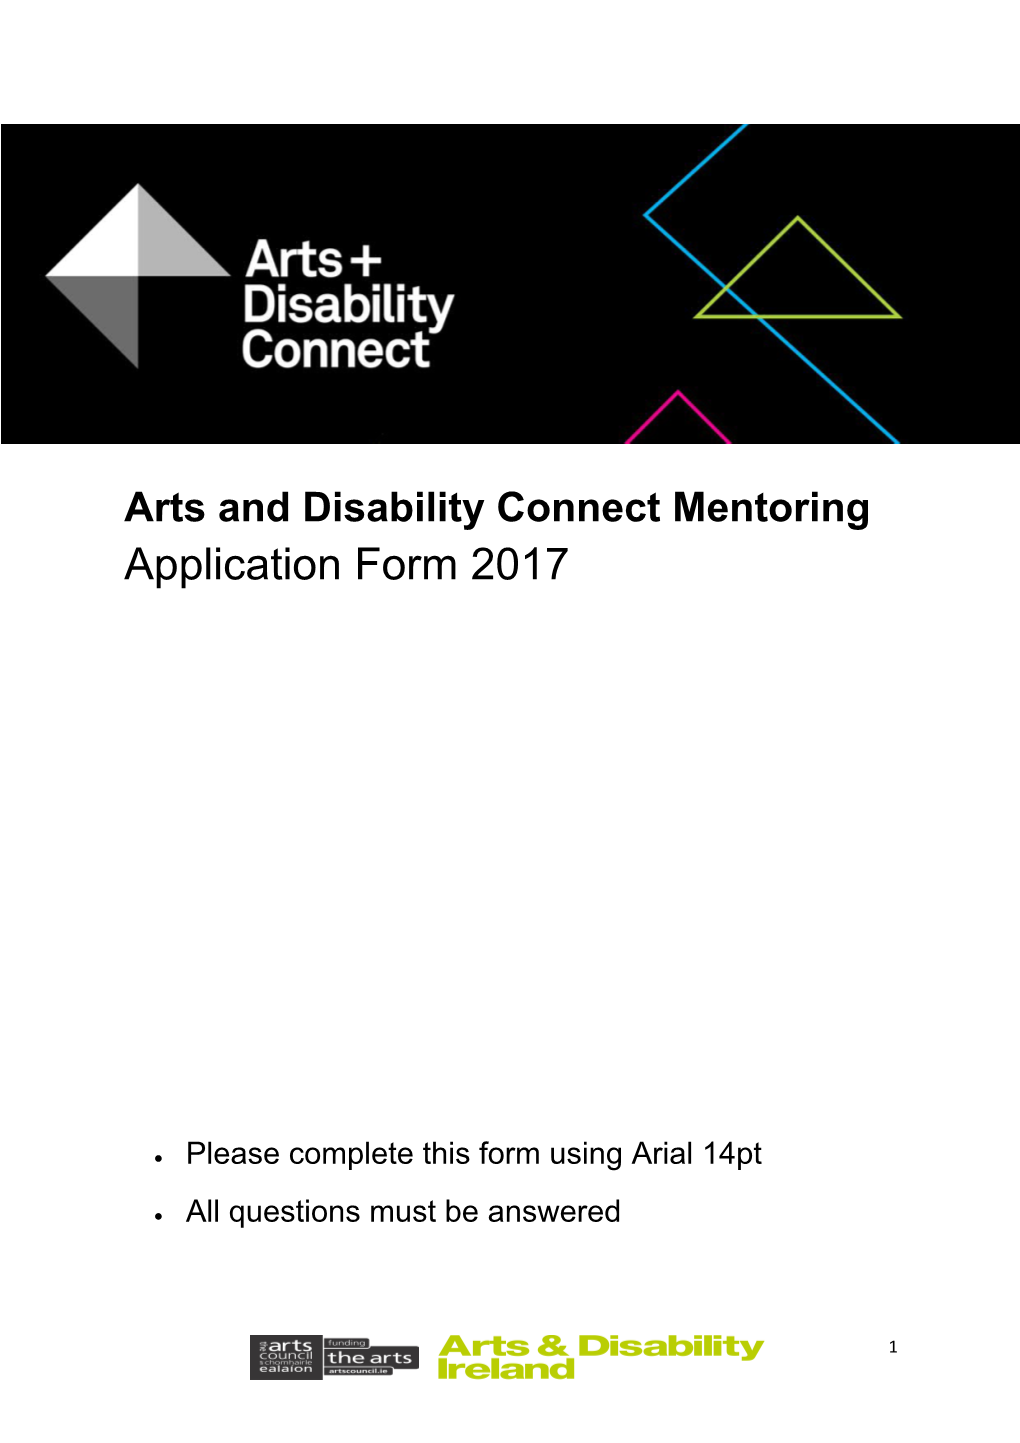 Arts and Disability Connect Mentoring Application Form 2017